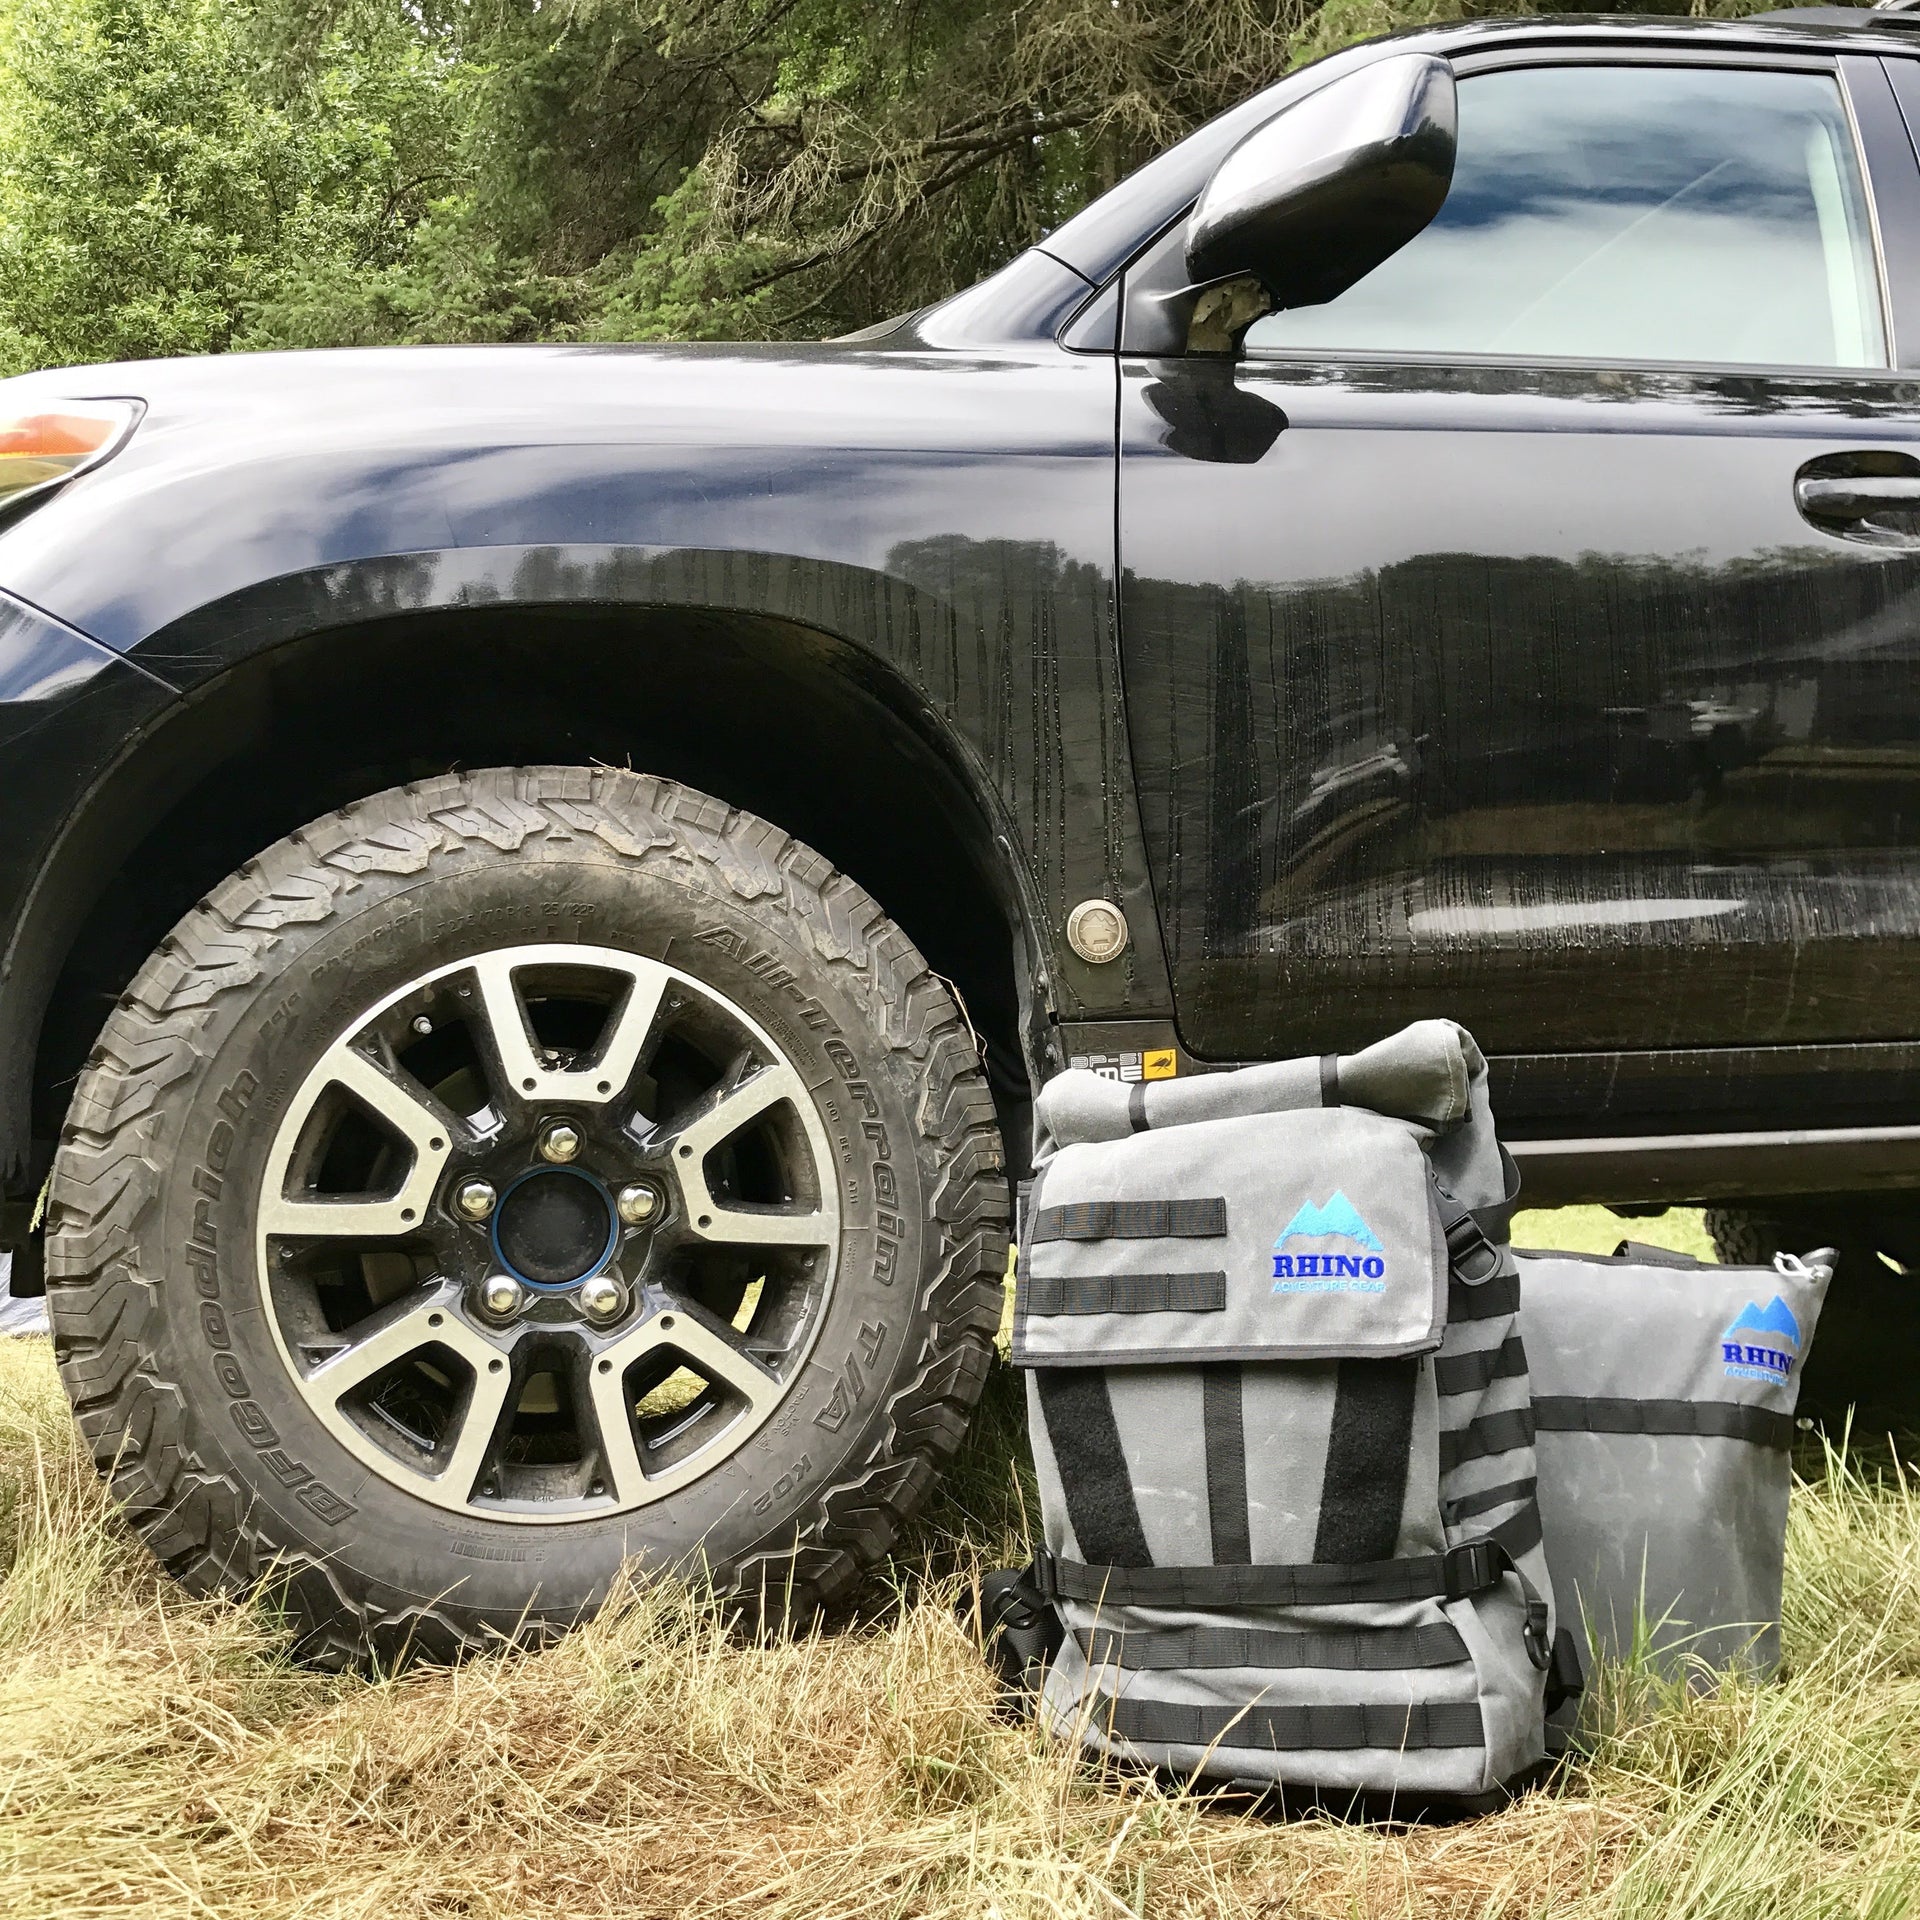 Adventure Backpack and Adventure Tote Bag with Rhino Adventure Gear embroidered logo leaning against black Toyota Landcruiser near wheel